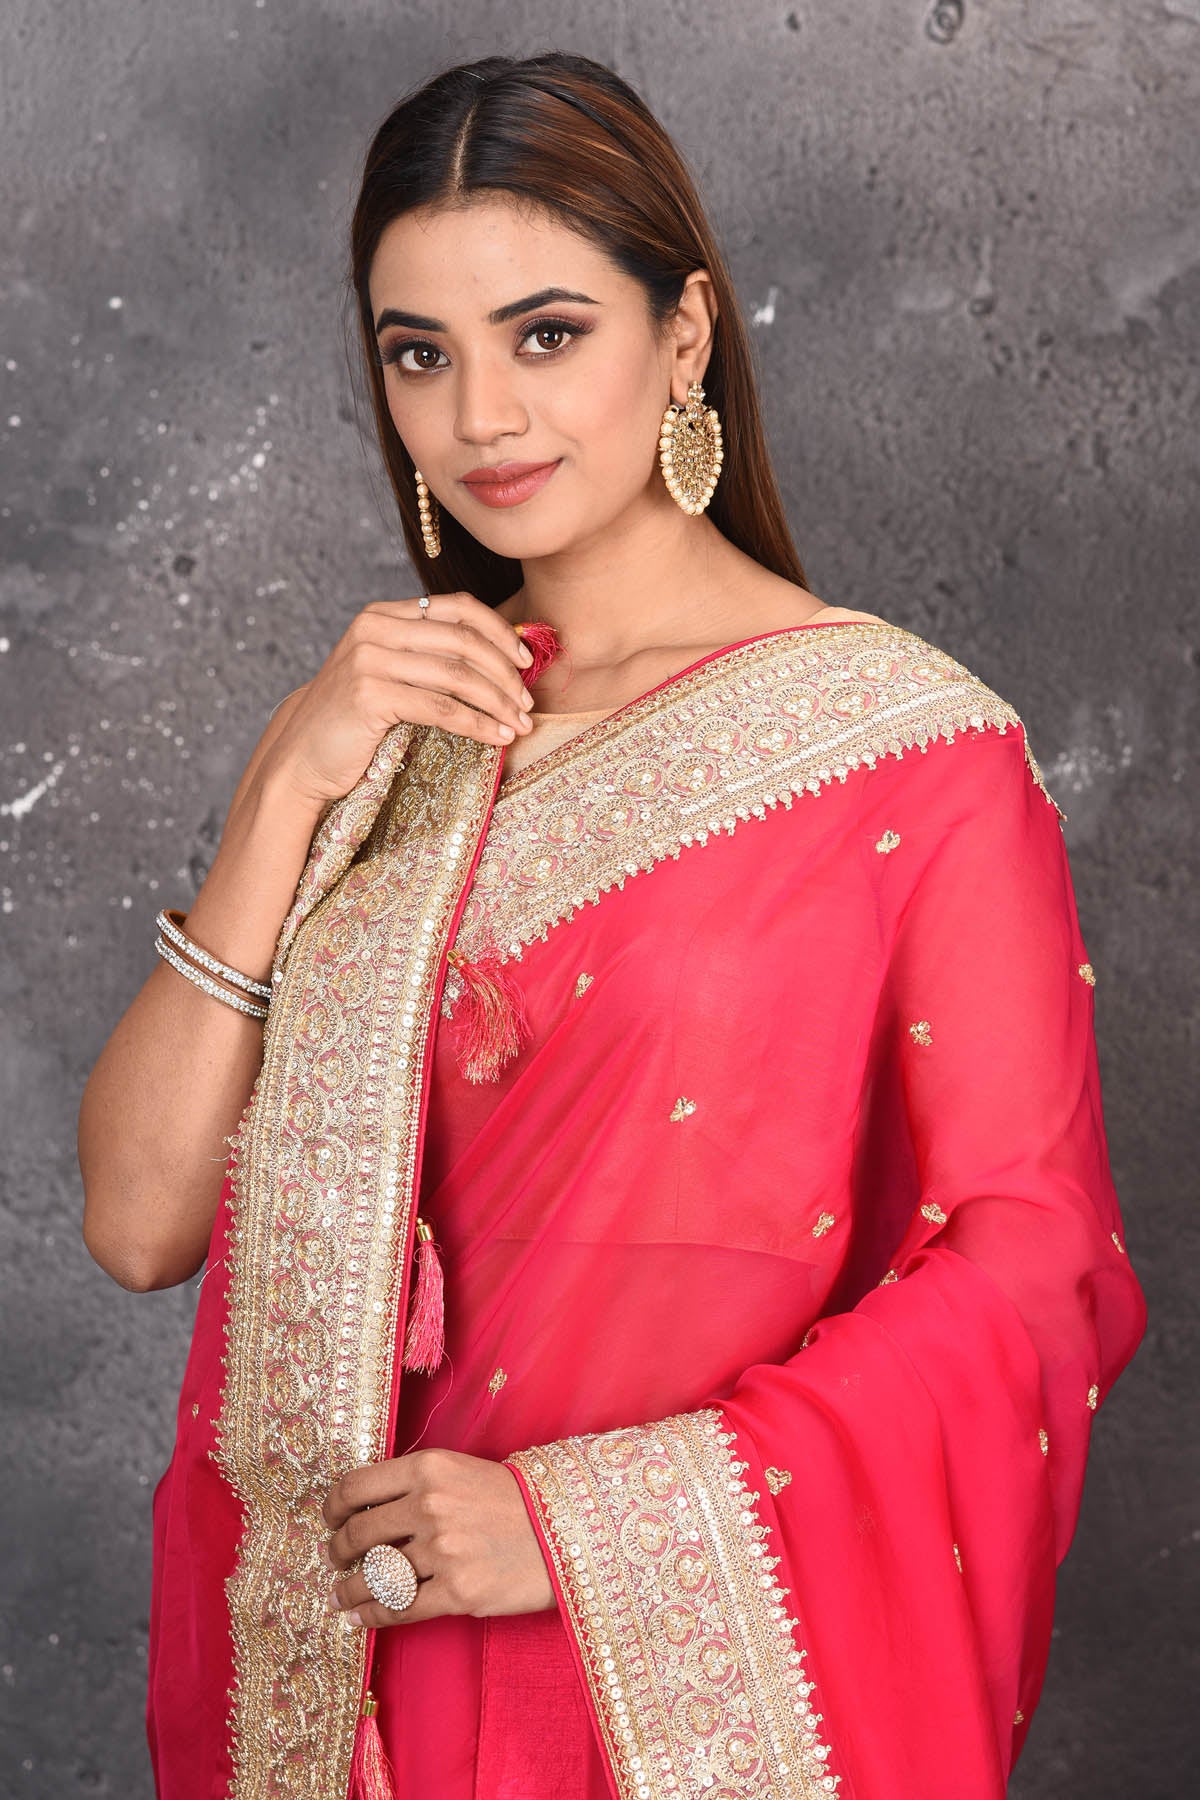 Shop exquisite pink georgette banarasi designer saree with golden heavy Border online in USA which has crafted by skilled weaver of Banaras with elegance and grace, this saree is definitely the epitome of beauty and a must have in your collection. Buy designer handwoven banarasi georgette sari with any blouse from Pure Elegance Indian saree store in USA.-Close up.